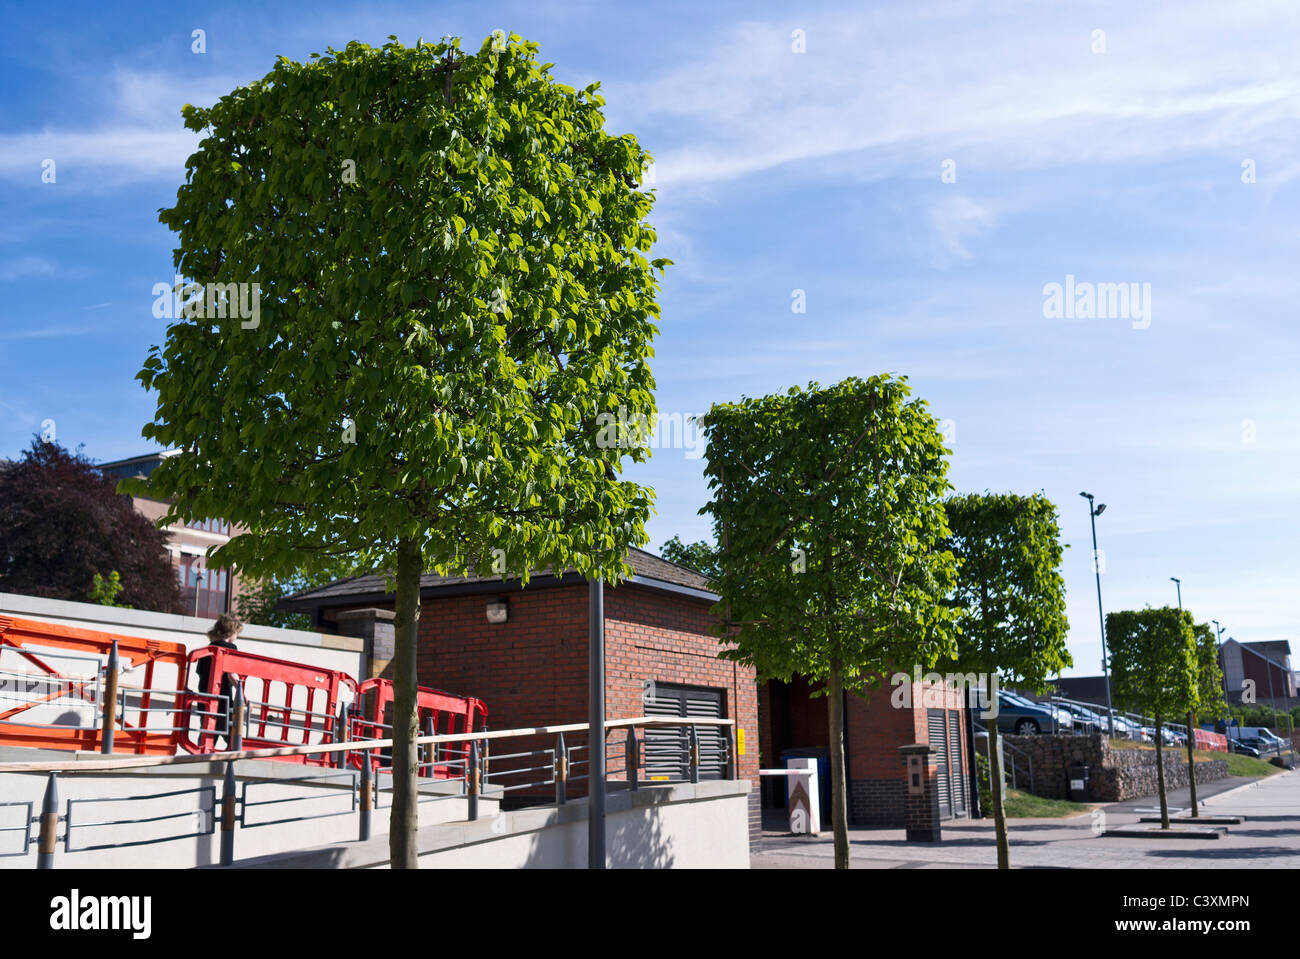 Ornamental shaped trees trained in geometric shapes in Gloucester Docks England UK Stock Photo